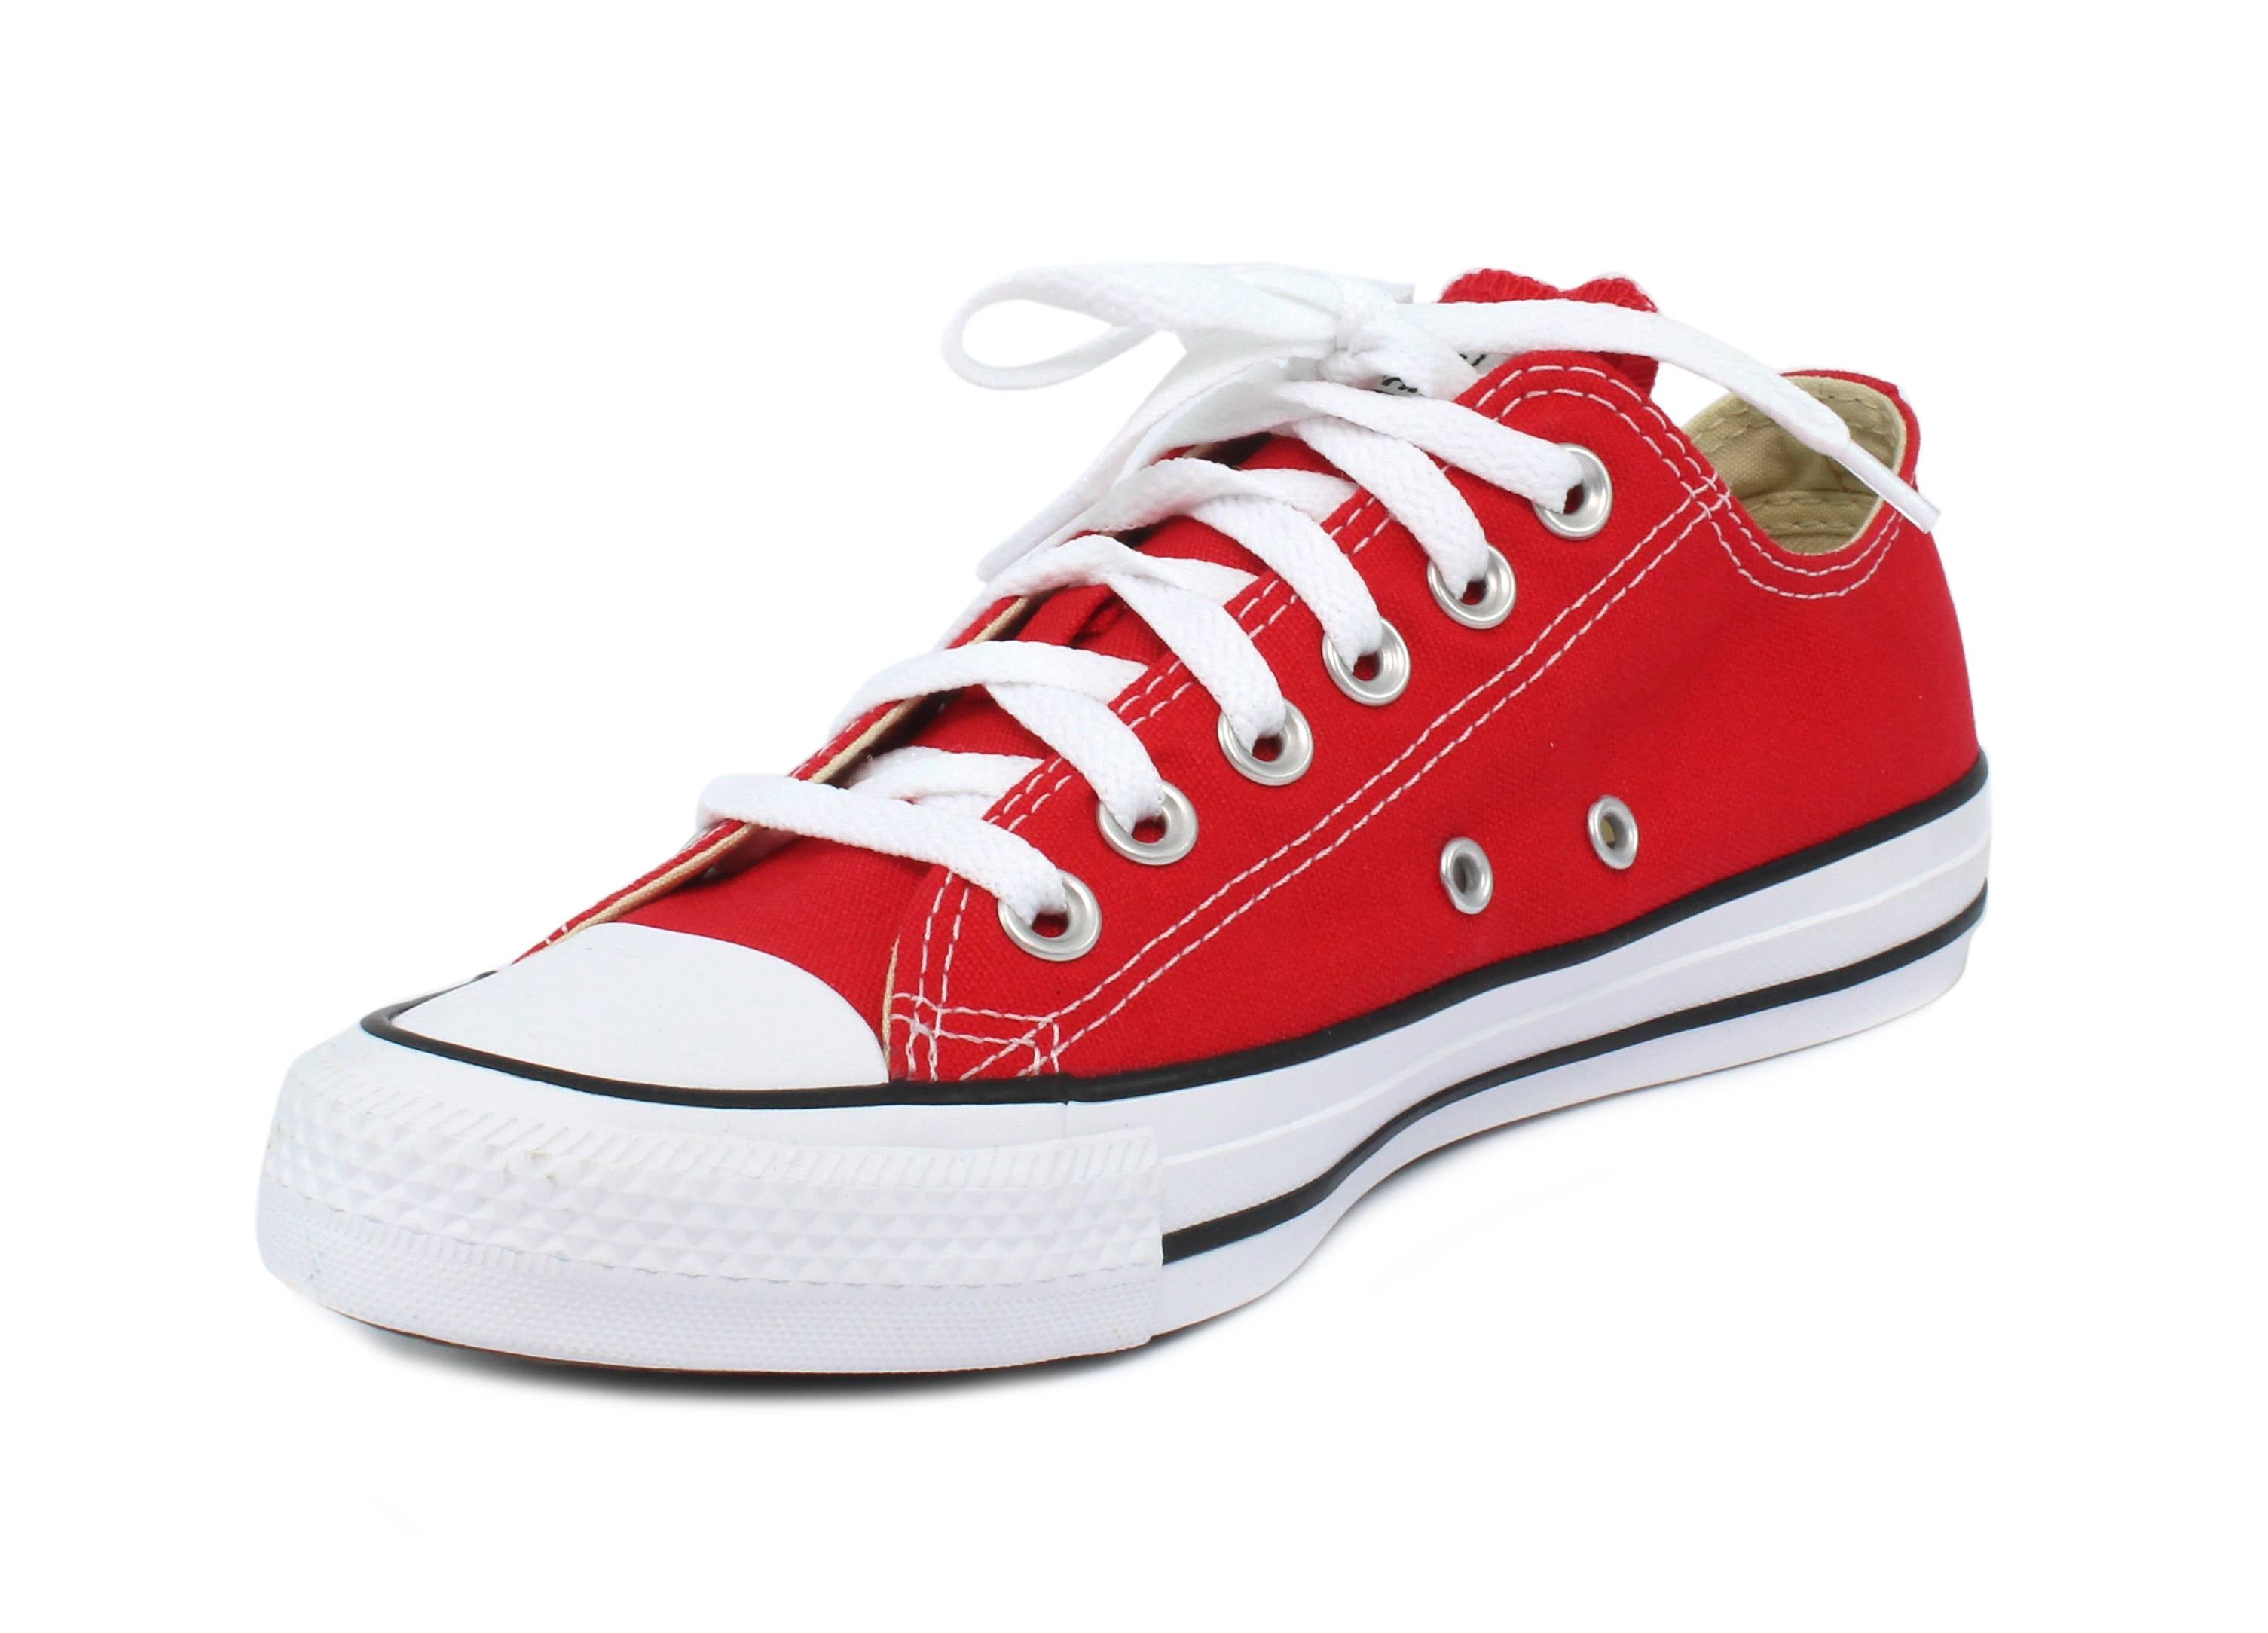 Sneaker CONVERSE CHUCK TAYLOR ALL STAR - OX - R RED M9696C